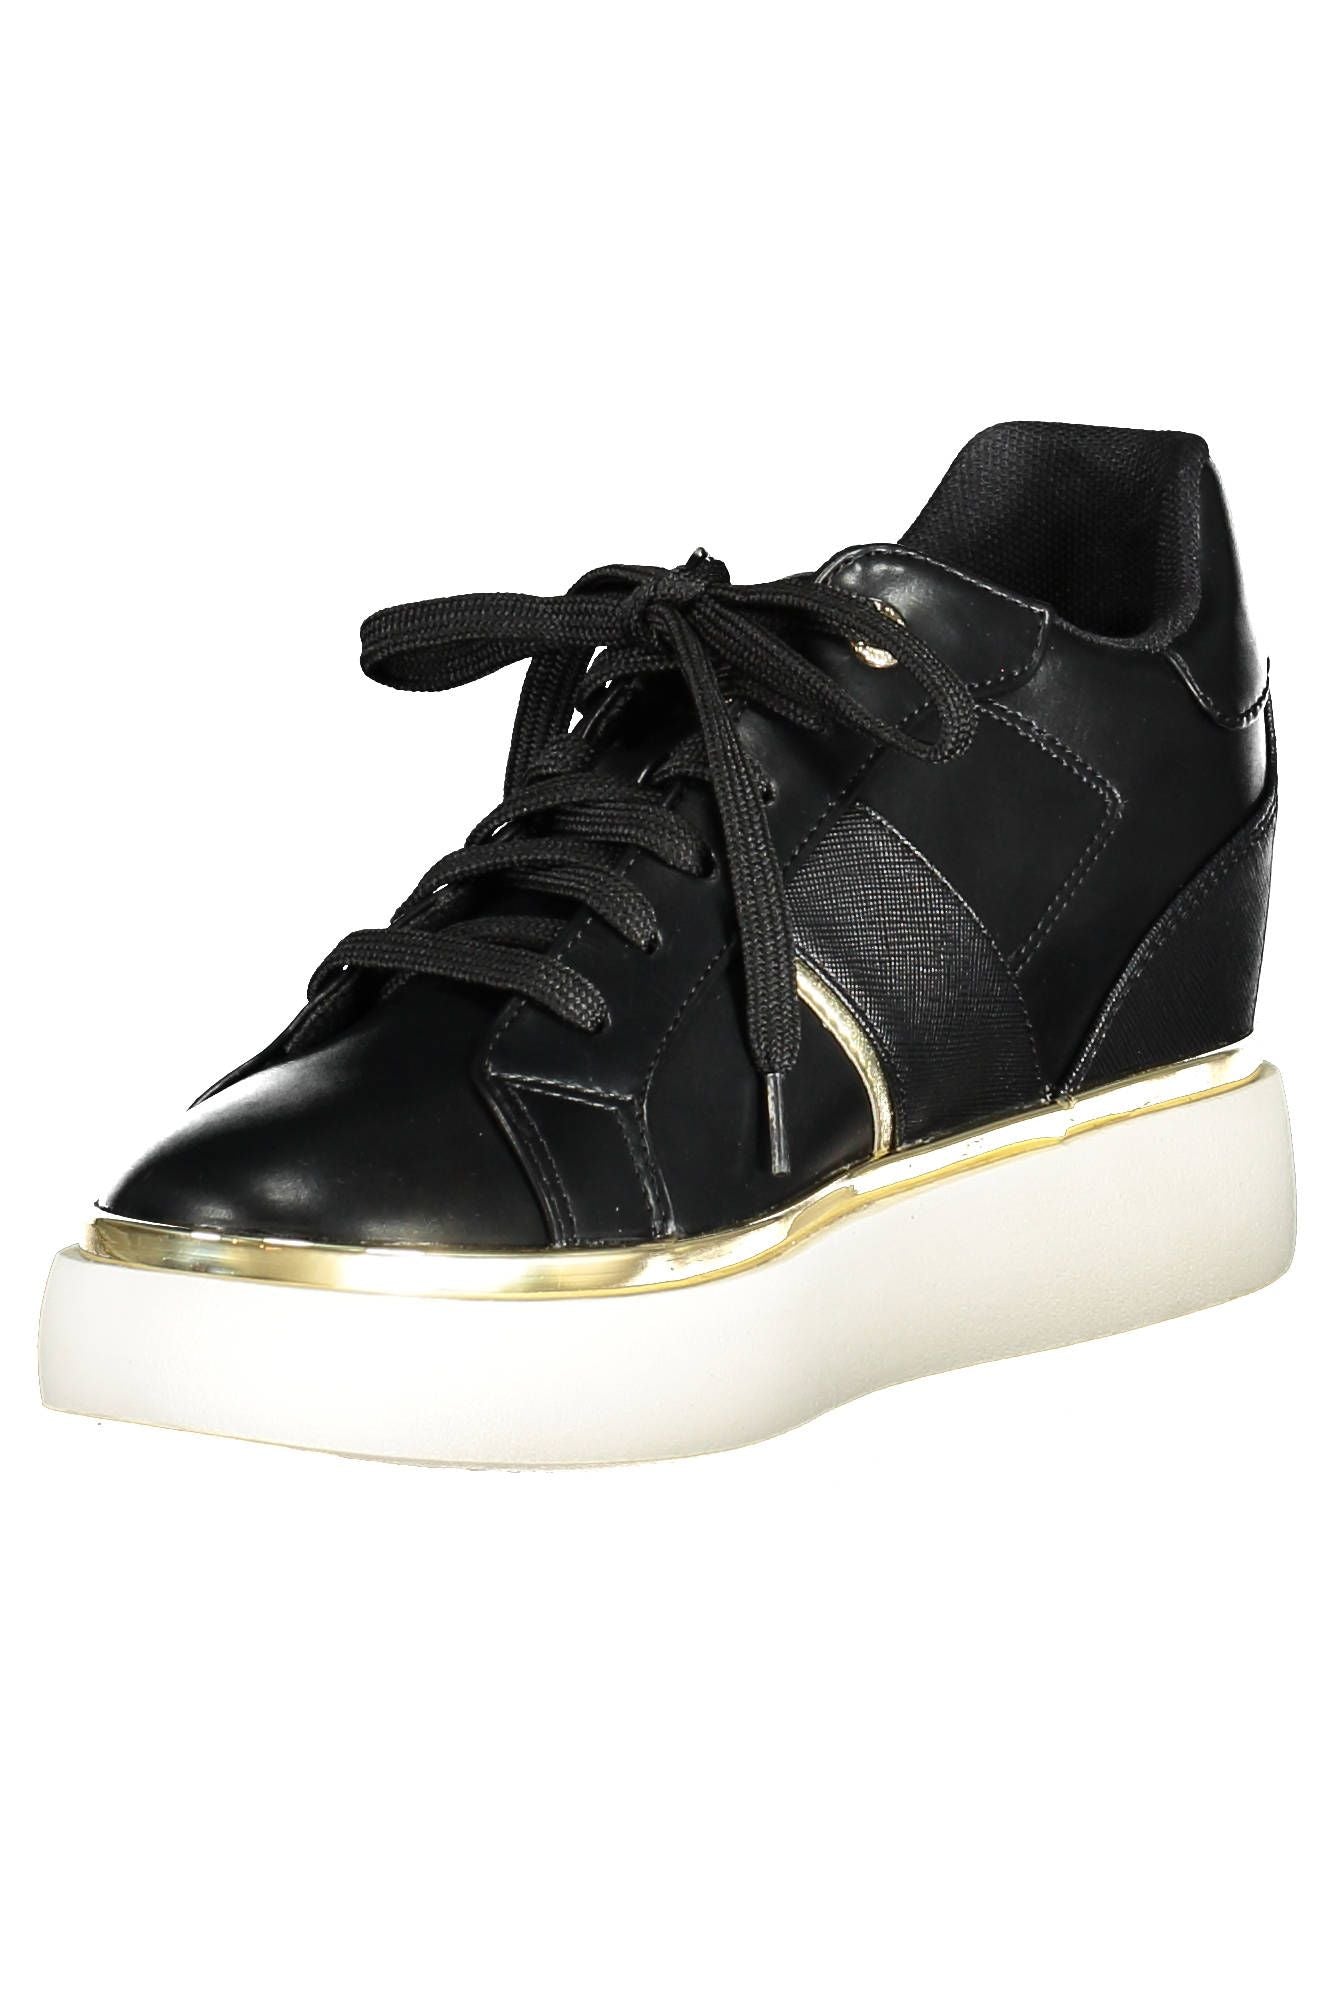 Chic Black Lace-Up Sneakers with Logo Detailing